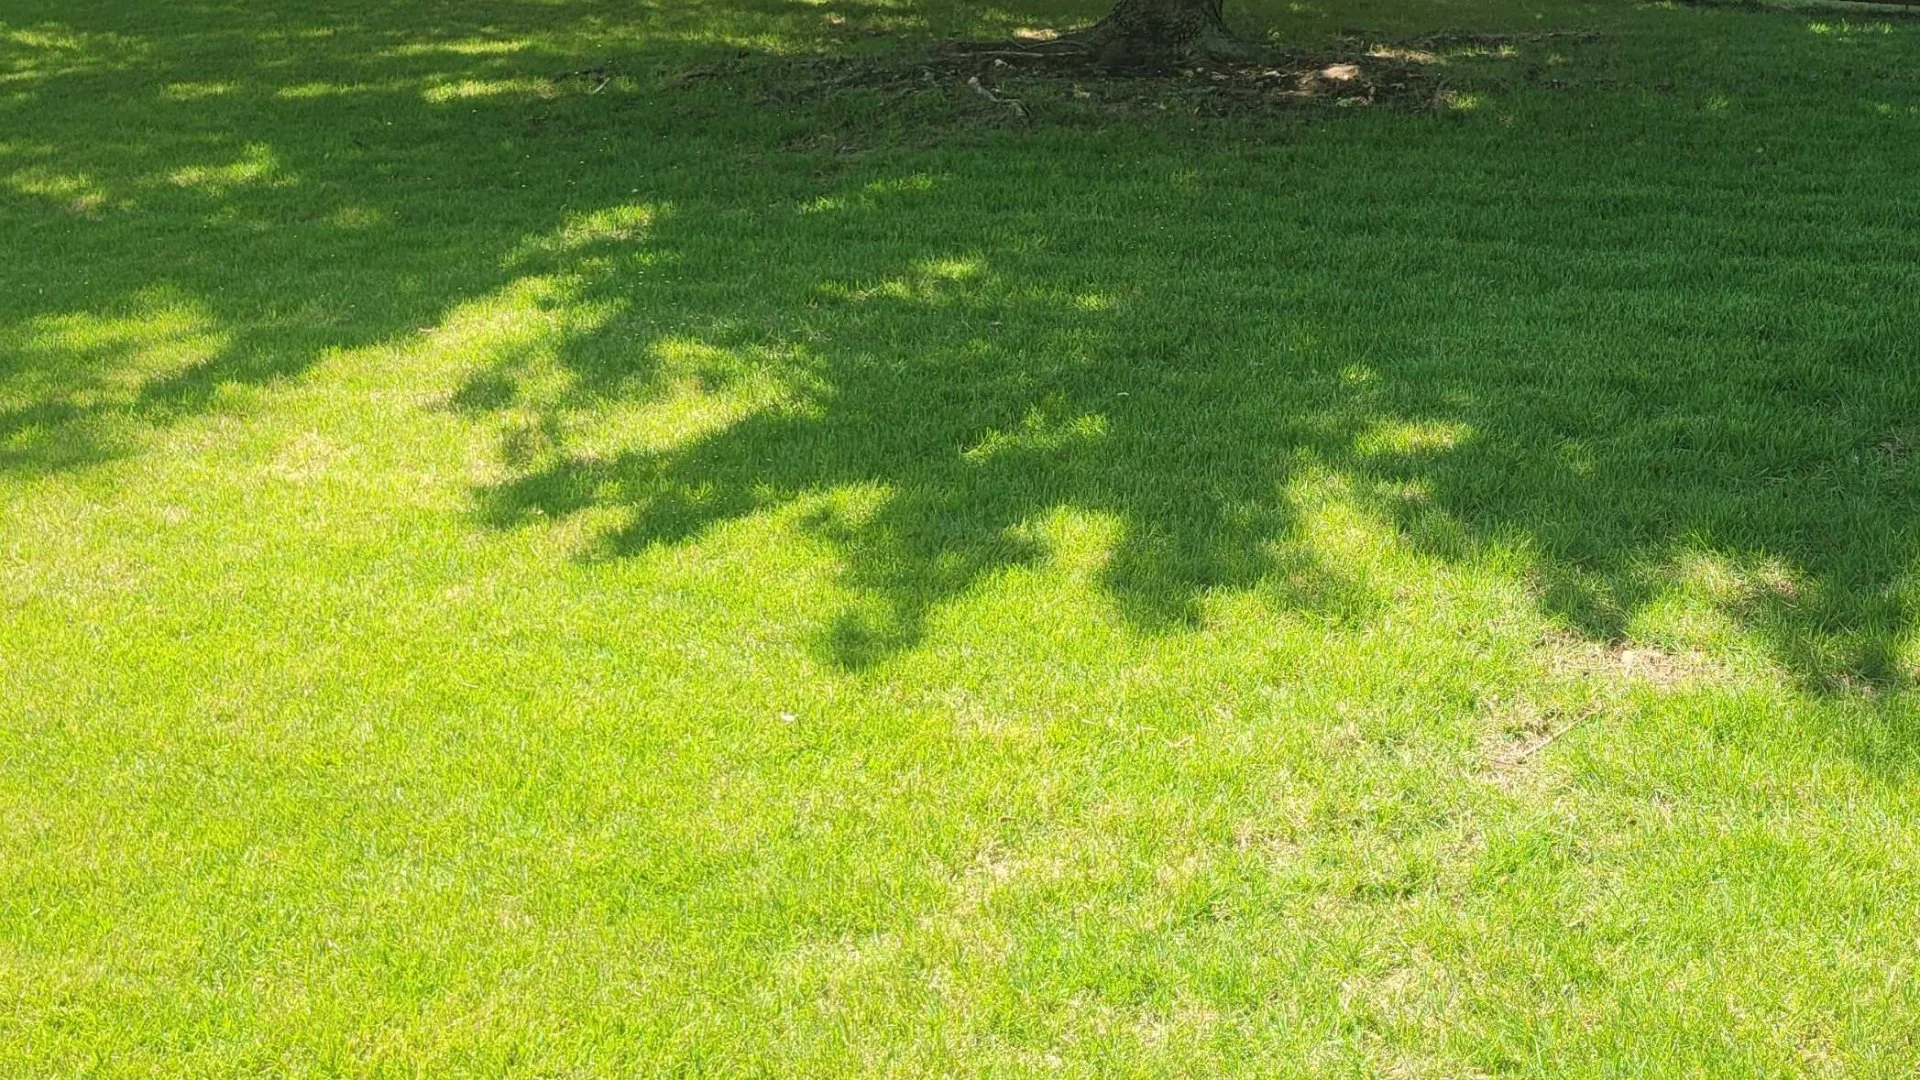 3 Mistakes You Need to Avoid When Mowing Your Lawn